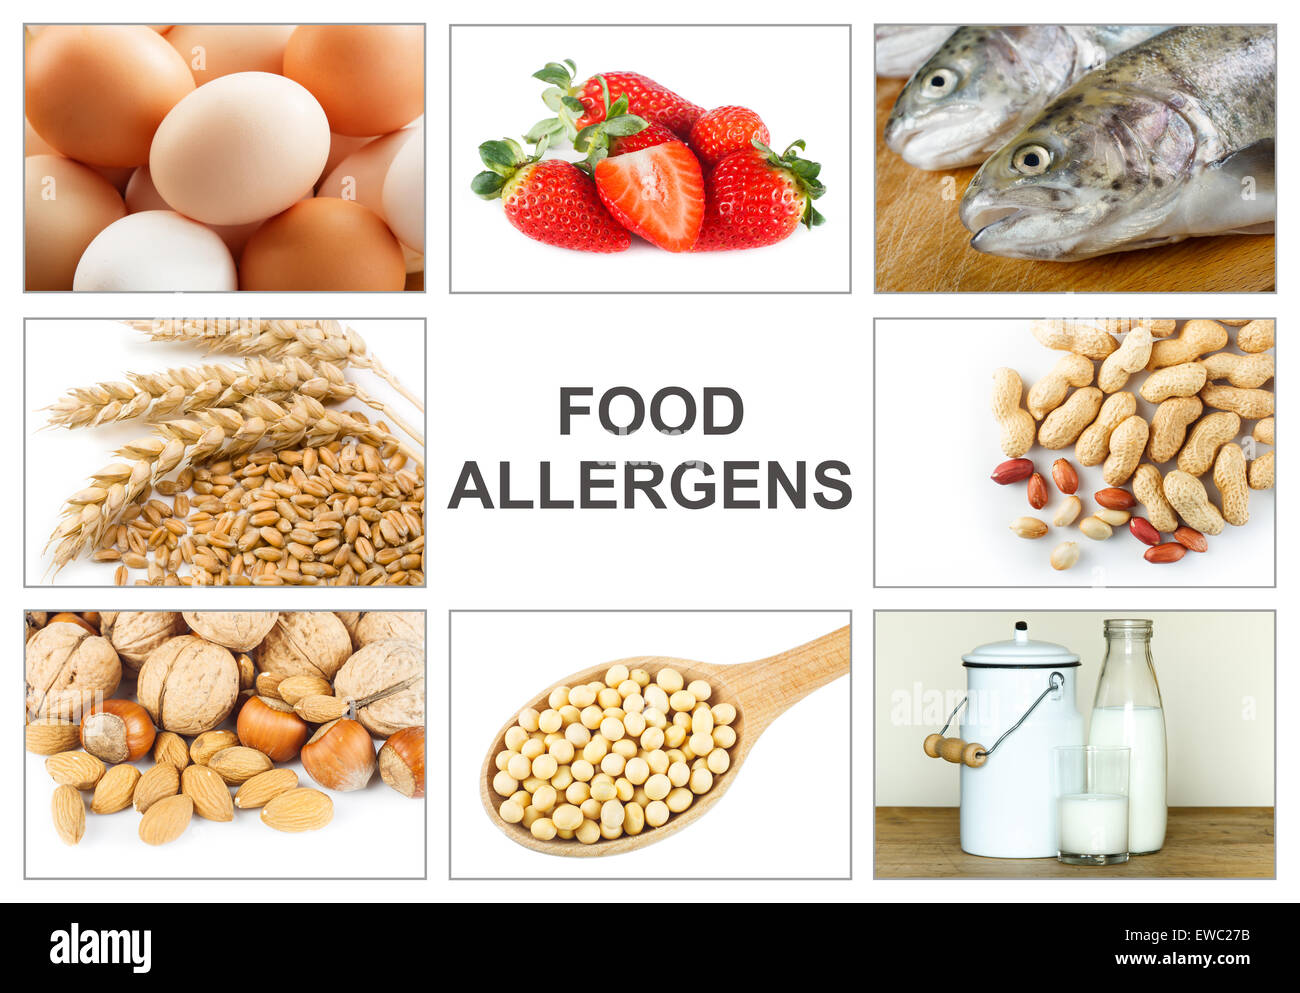 Allergy food concept. Food allergens as eggs, milk, fruit, tree nuts, peanut, soy, wheat and fish. Text 'food allergens' easy to Stock Photo